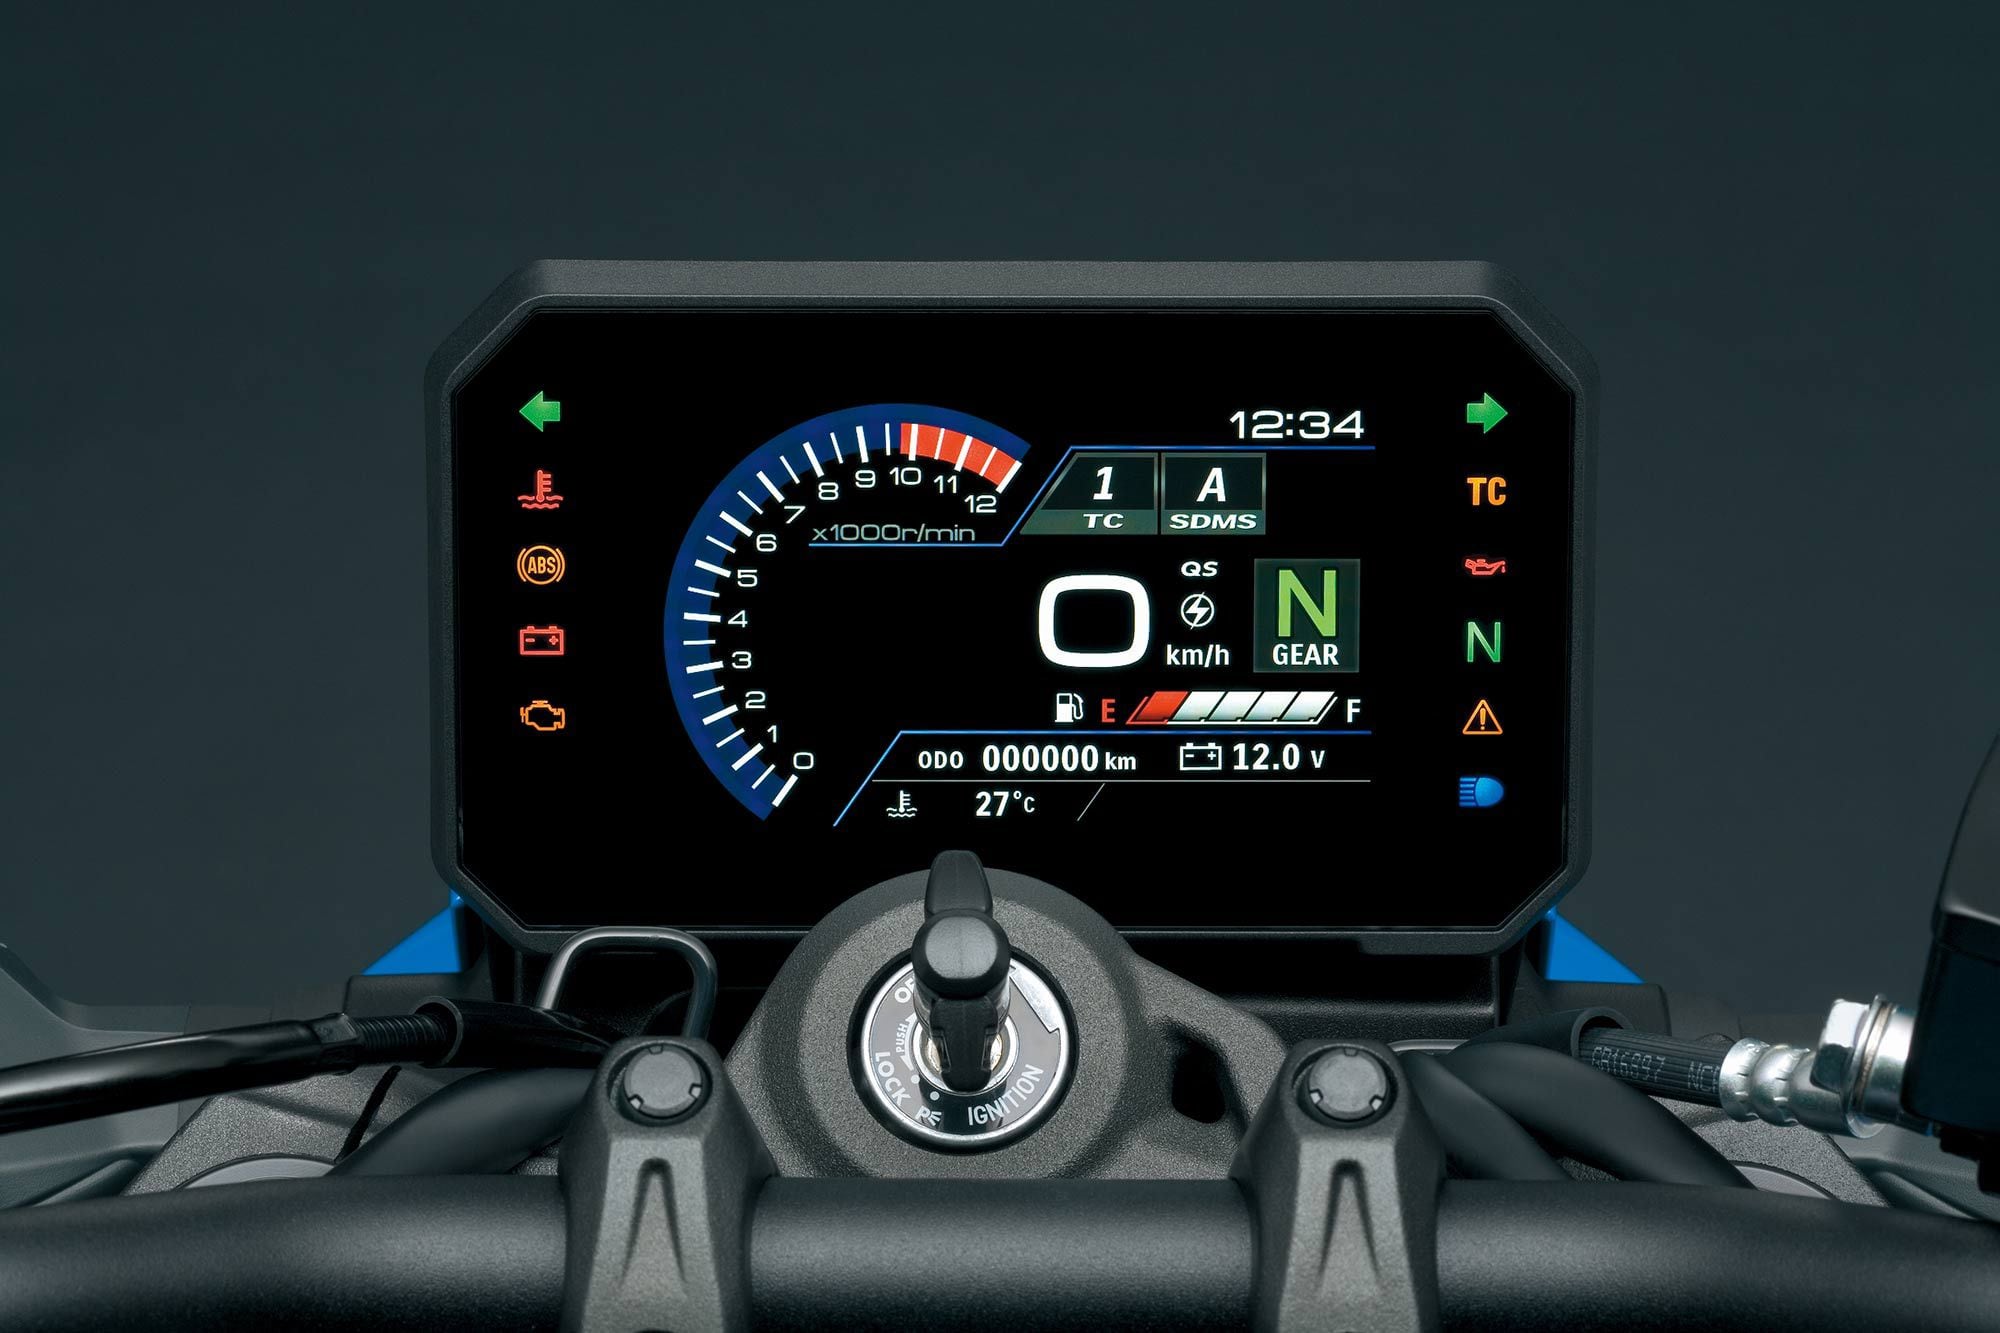 A 5-inch TFT display offers a look at important information. The GSX-8S has three ride modes, and three traction control settings, plus off.